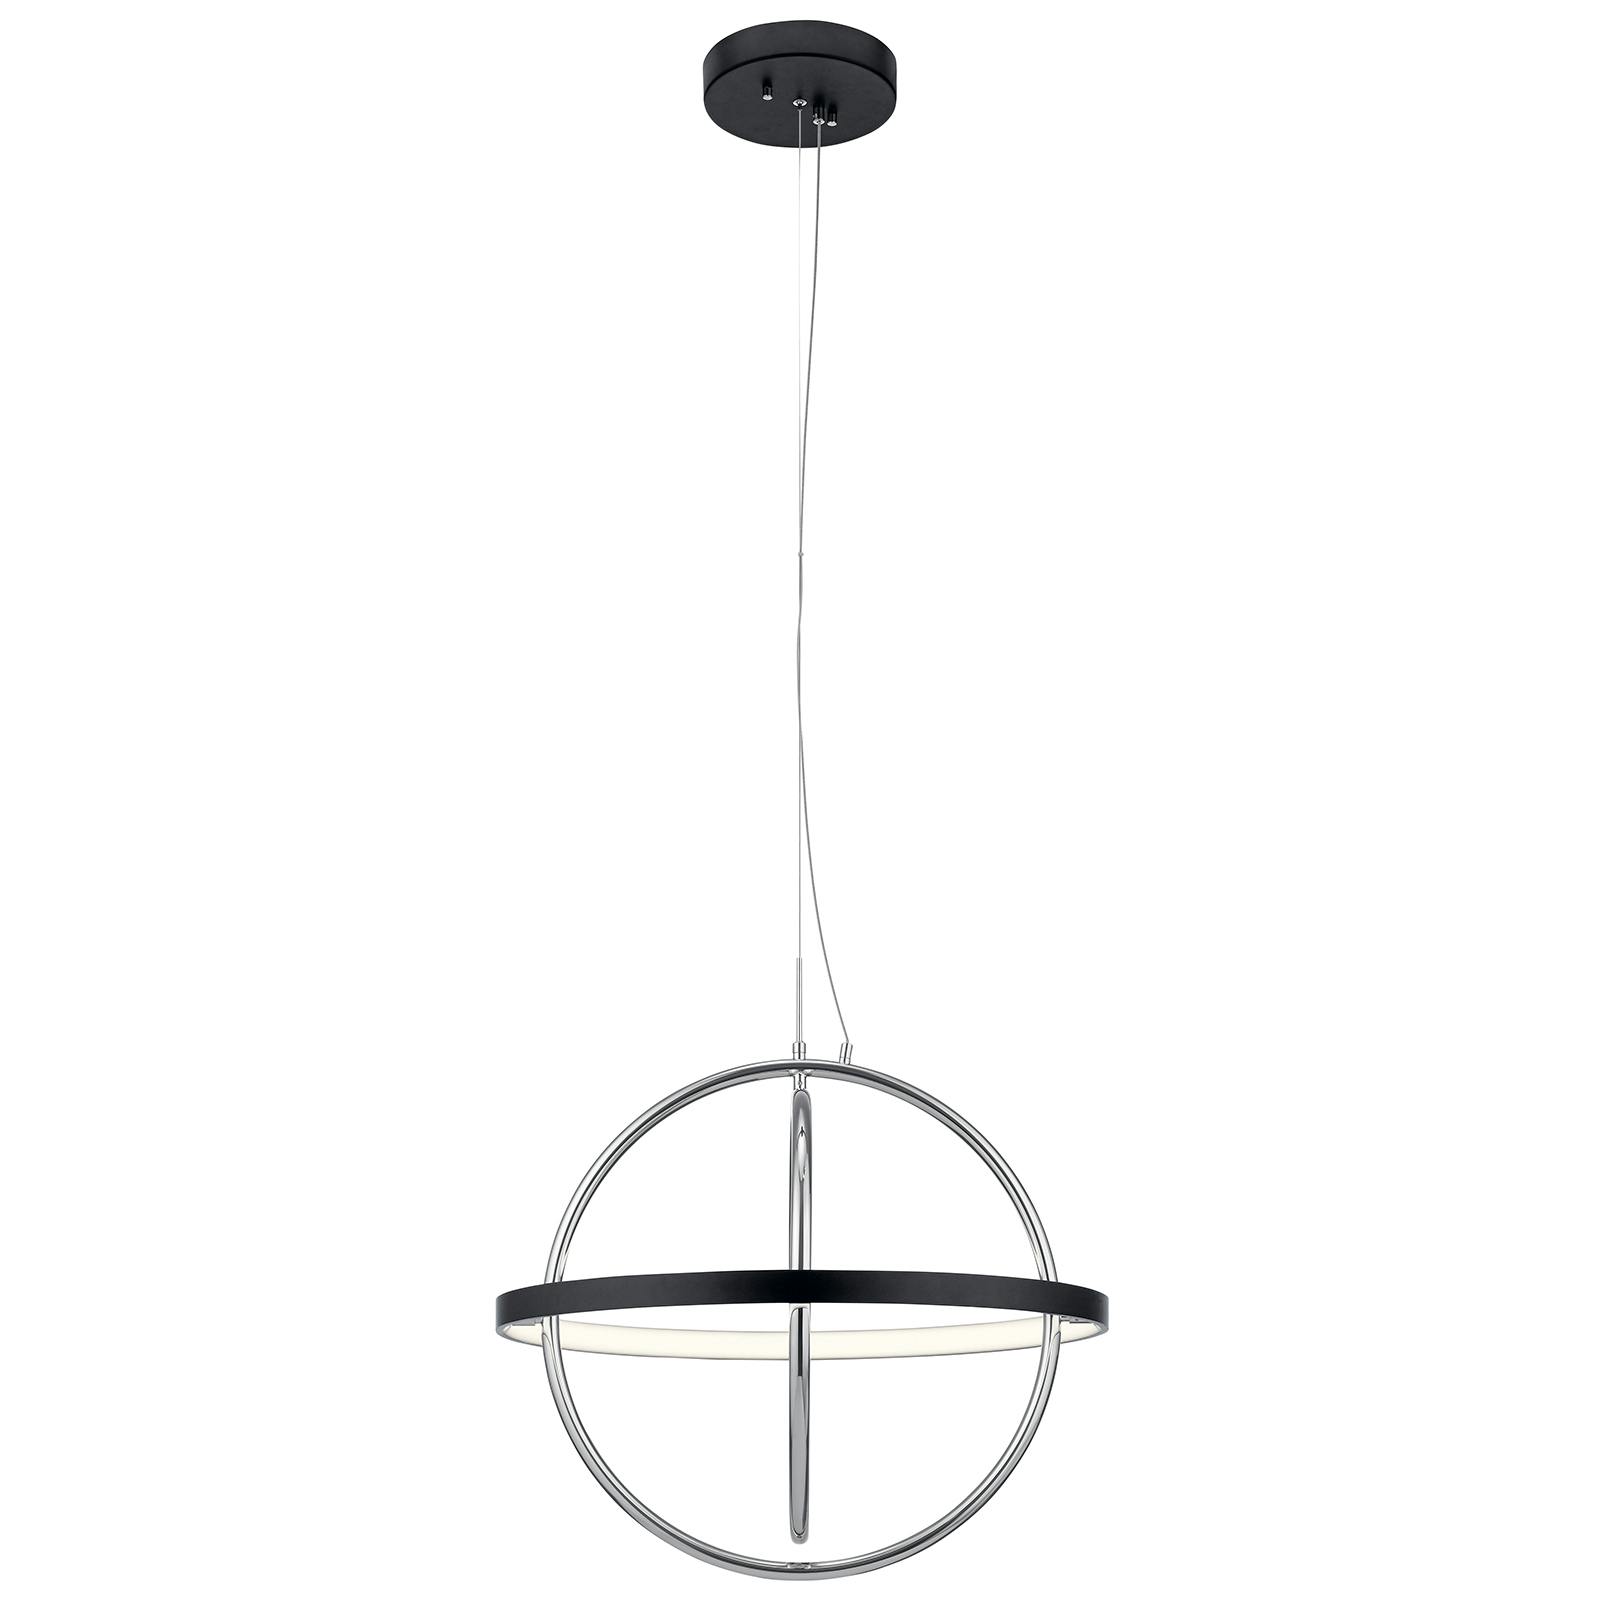 Profile view of the Arvo™ Small Orb Chandelier Matte Black on a white background